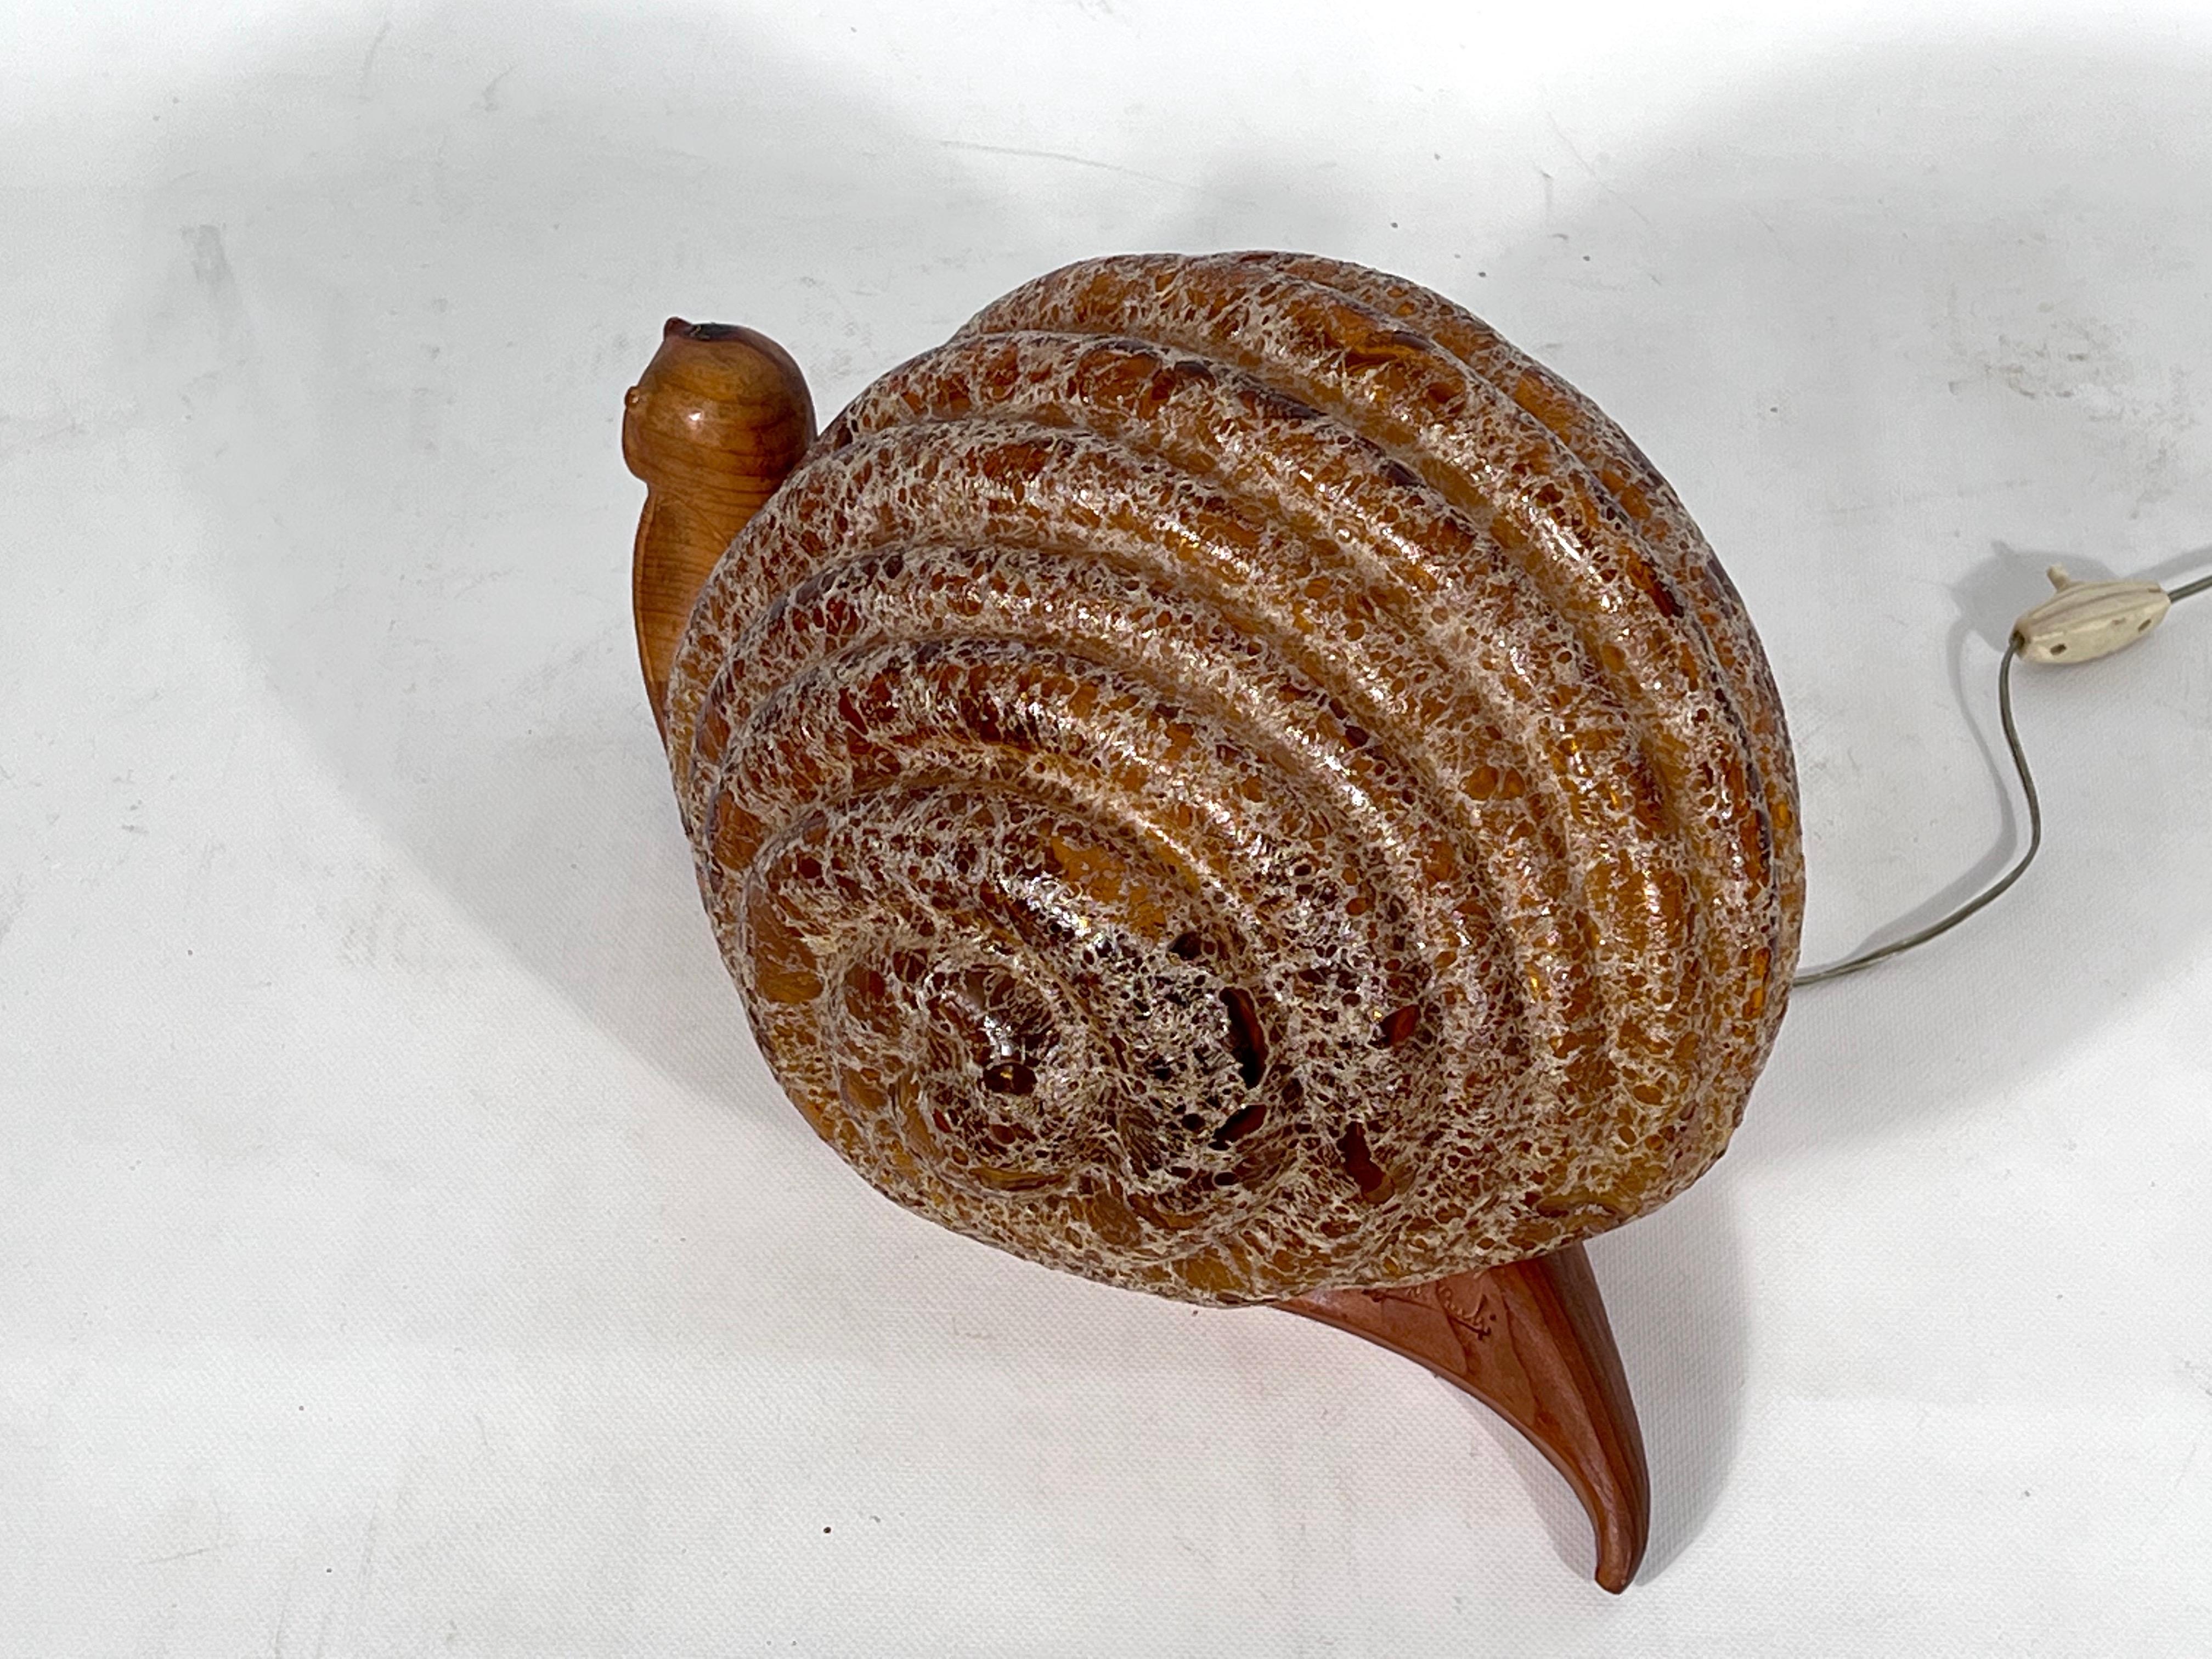 Mid-Century Modern Marzio Cecchi, Lumaca Snail Table Lamp from '69, Signed Limited Edition